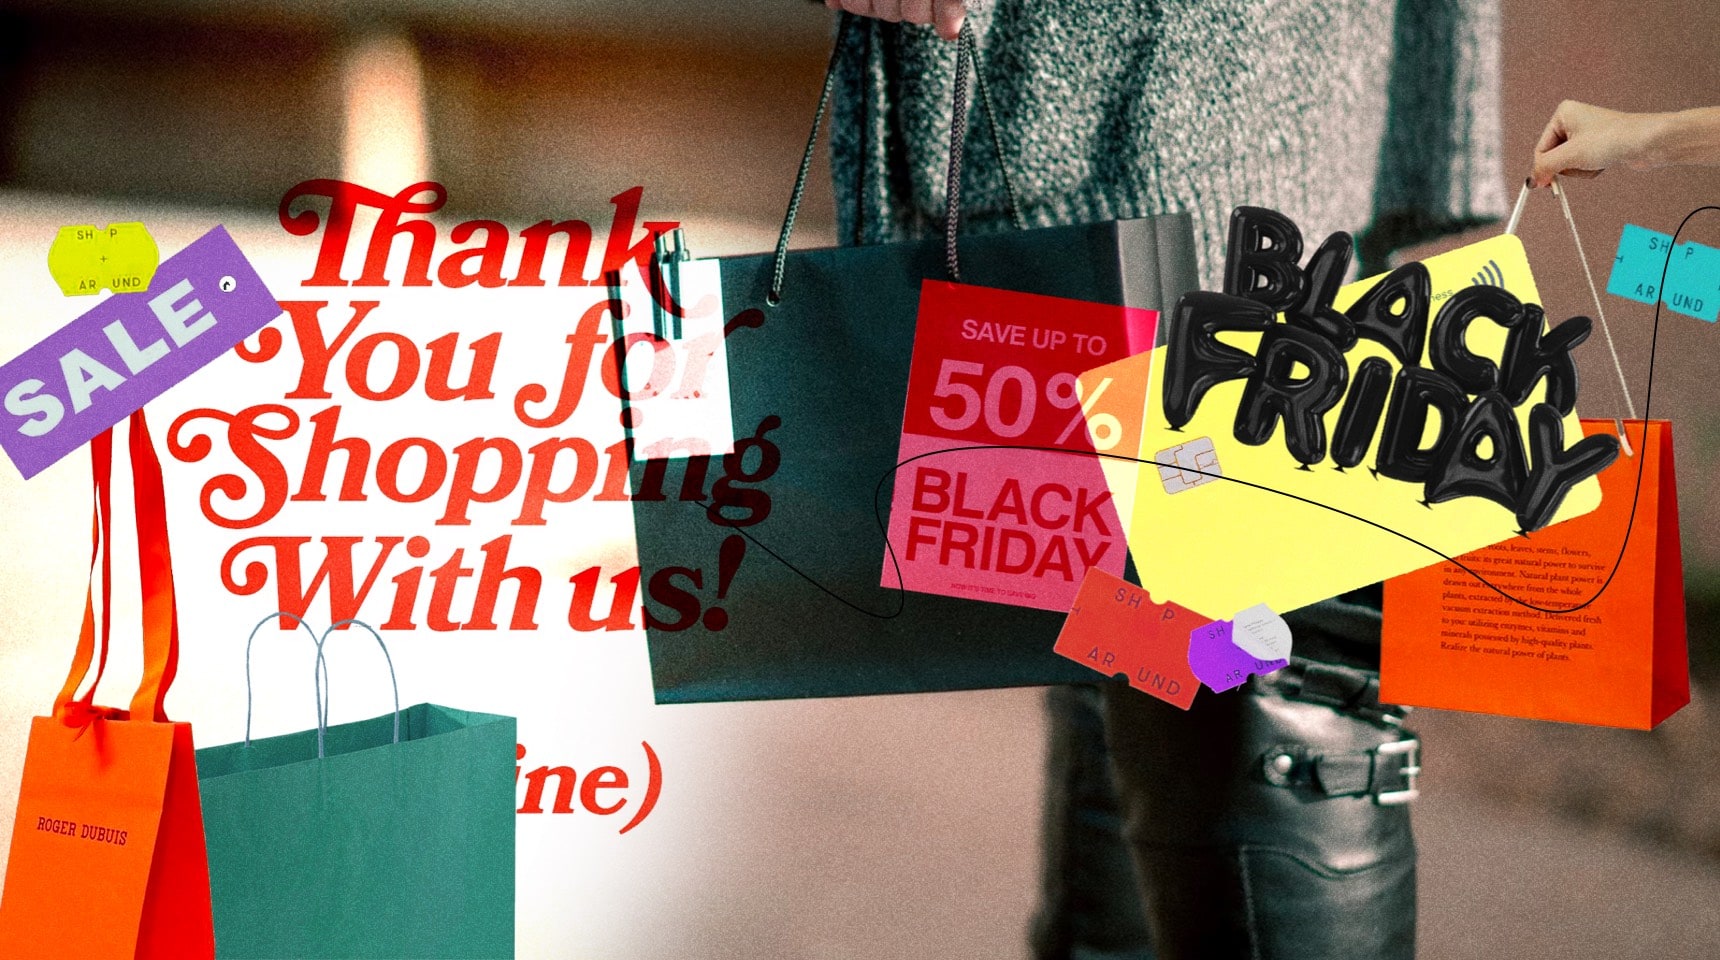 PennyWise podcast: Black Friday deals: 4 tips to get the biggest